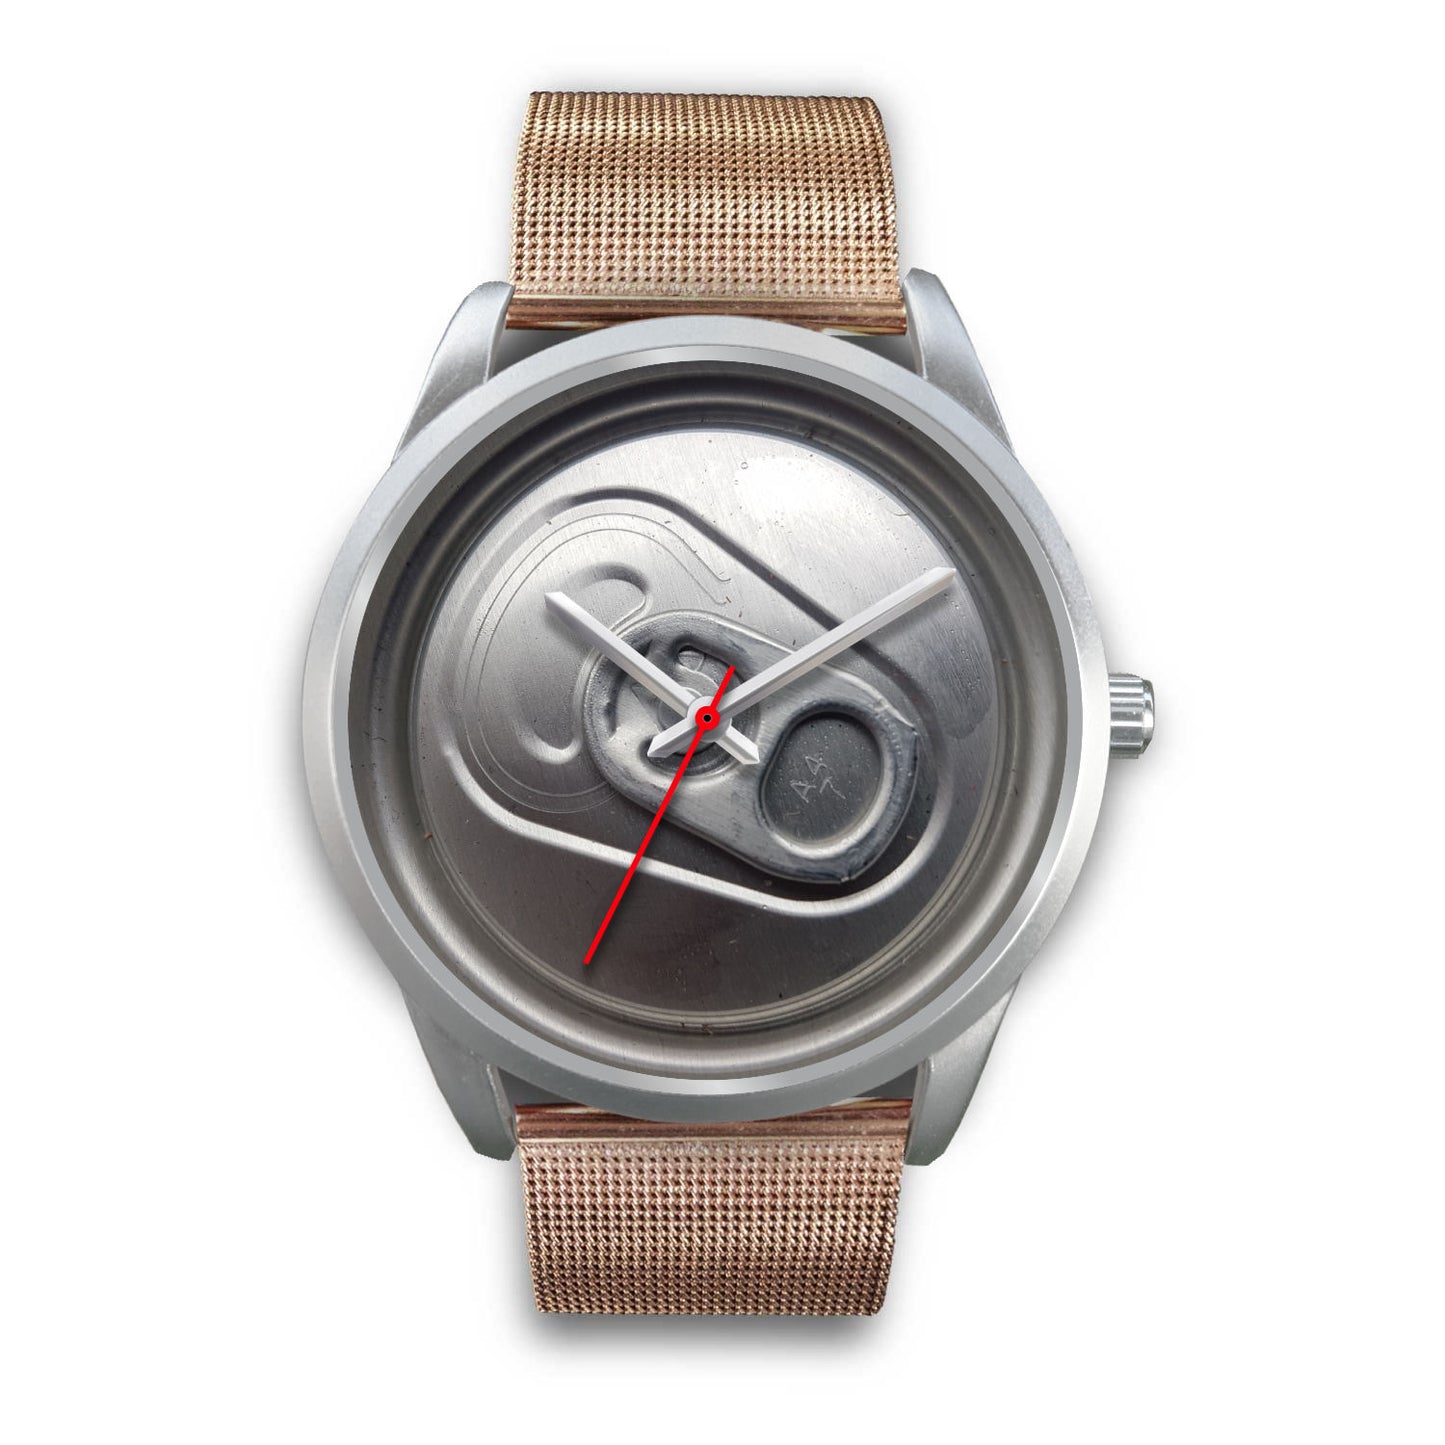 Beer time silver watch